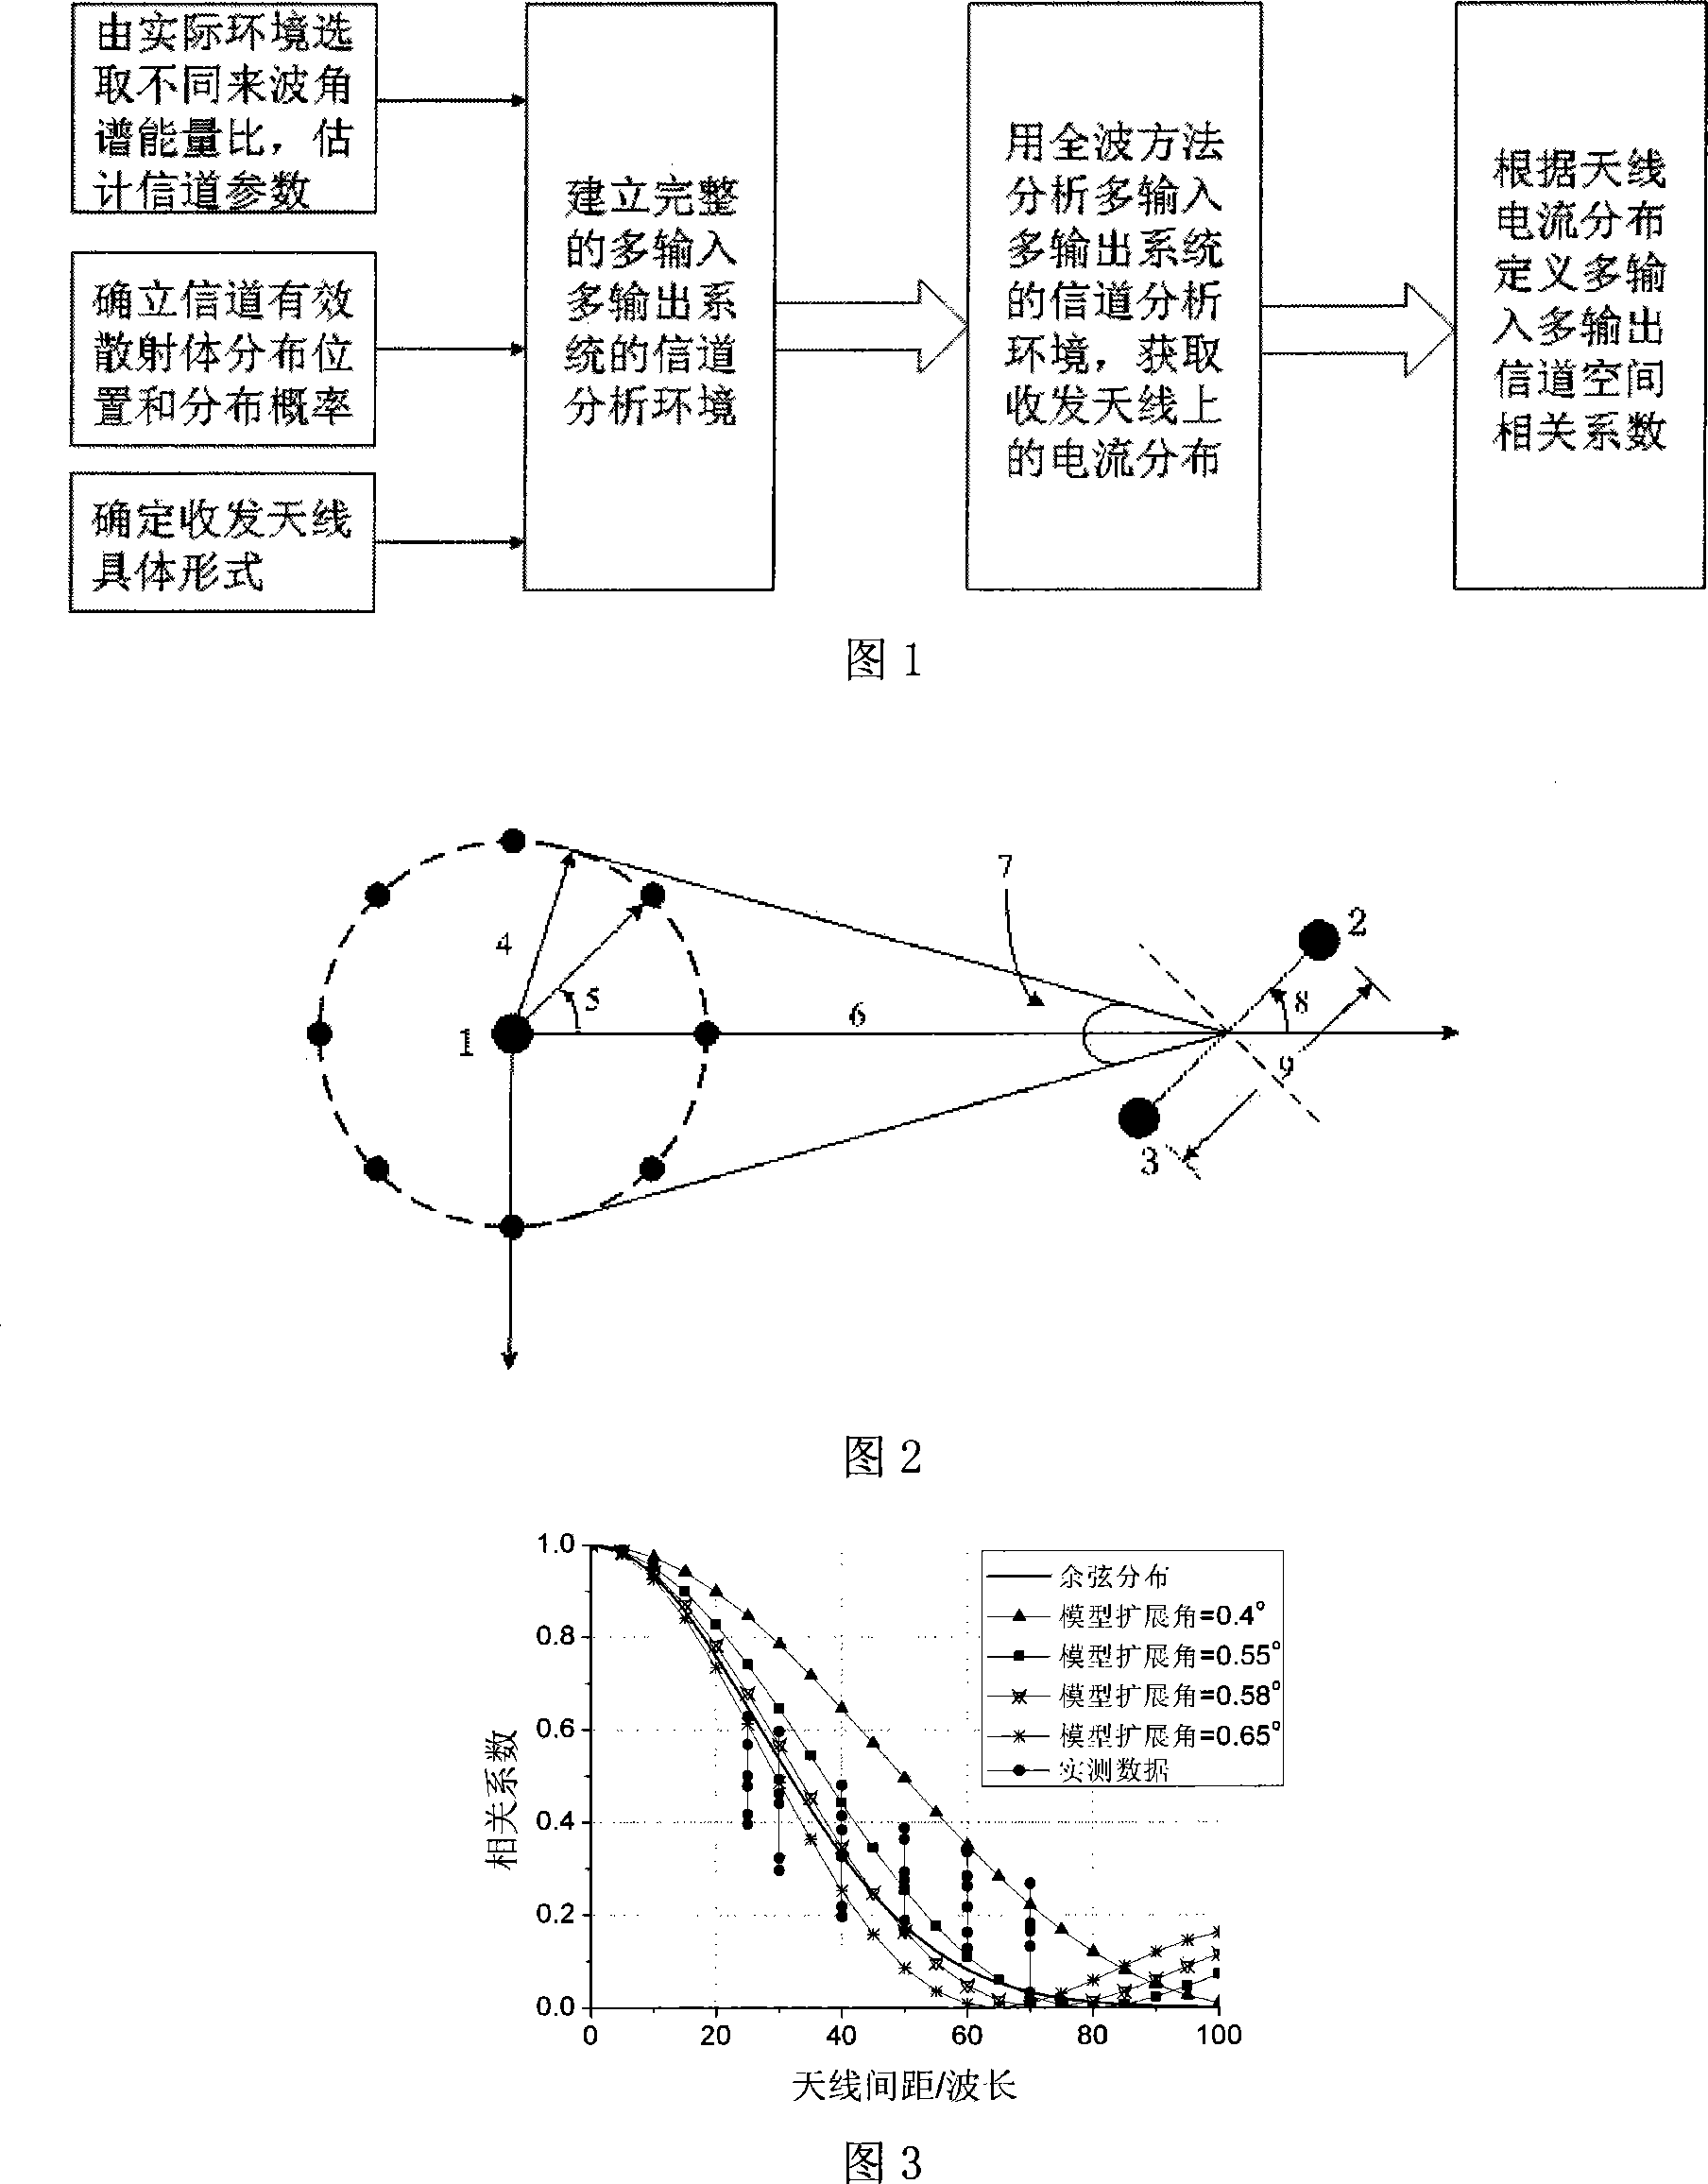 Channel relevancy estimating method based on full wave analysis in multi-input and multi-output system